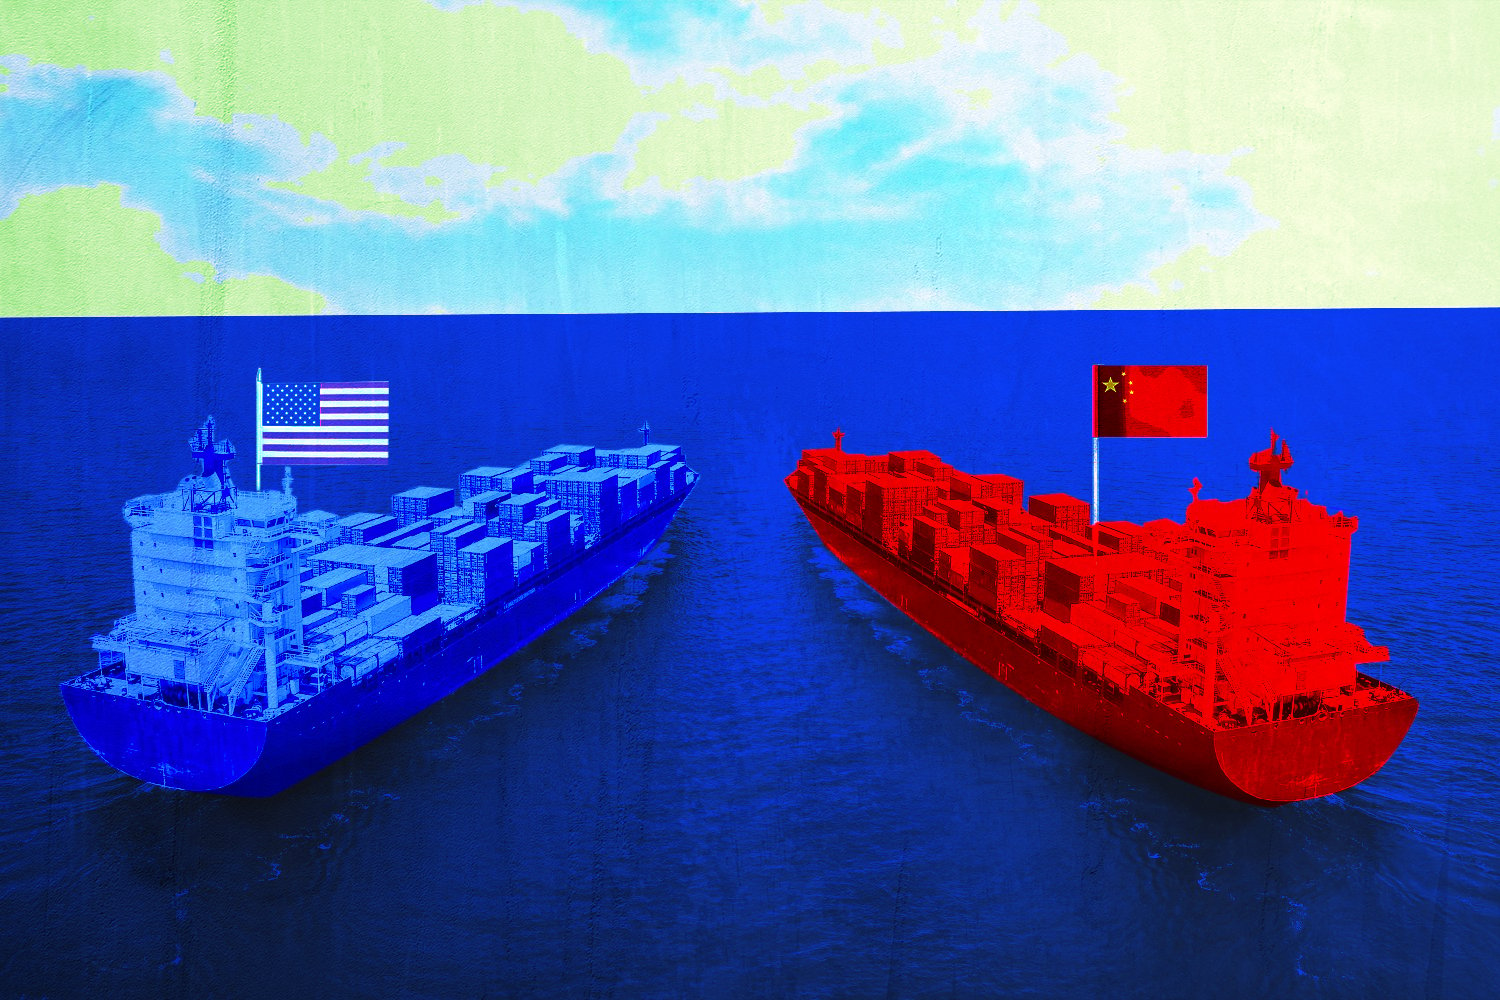 Illustration of two ships, one blue with an American flag, one red with a Chinese flag. In the sky, the clouds are slightly green and shaped like the continents of the Earth.